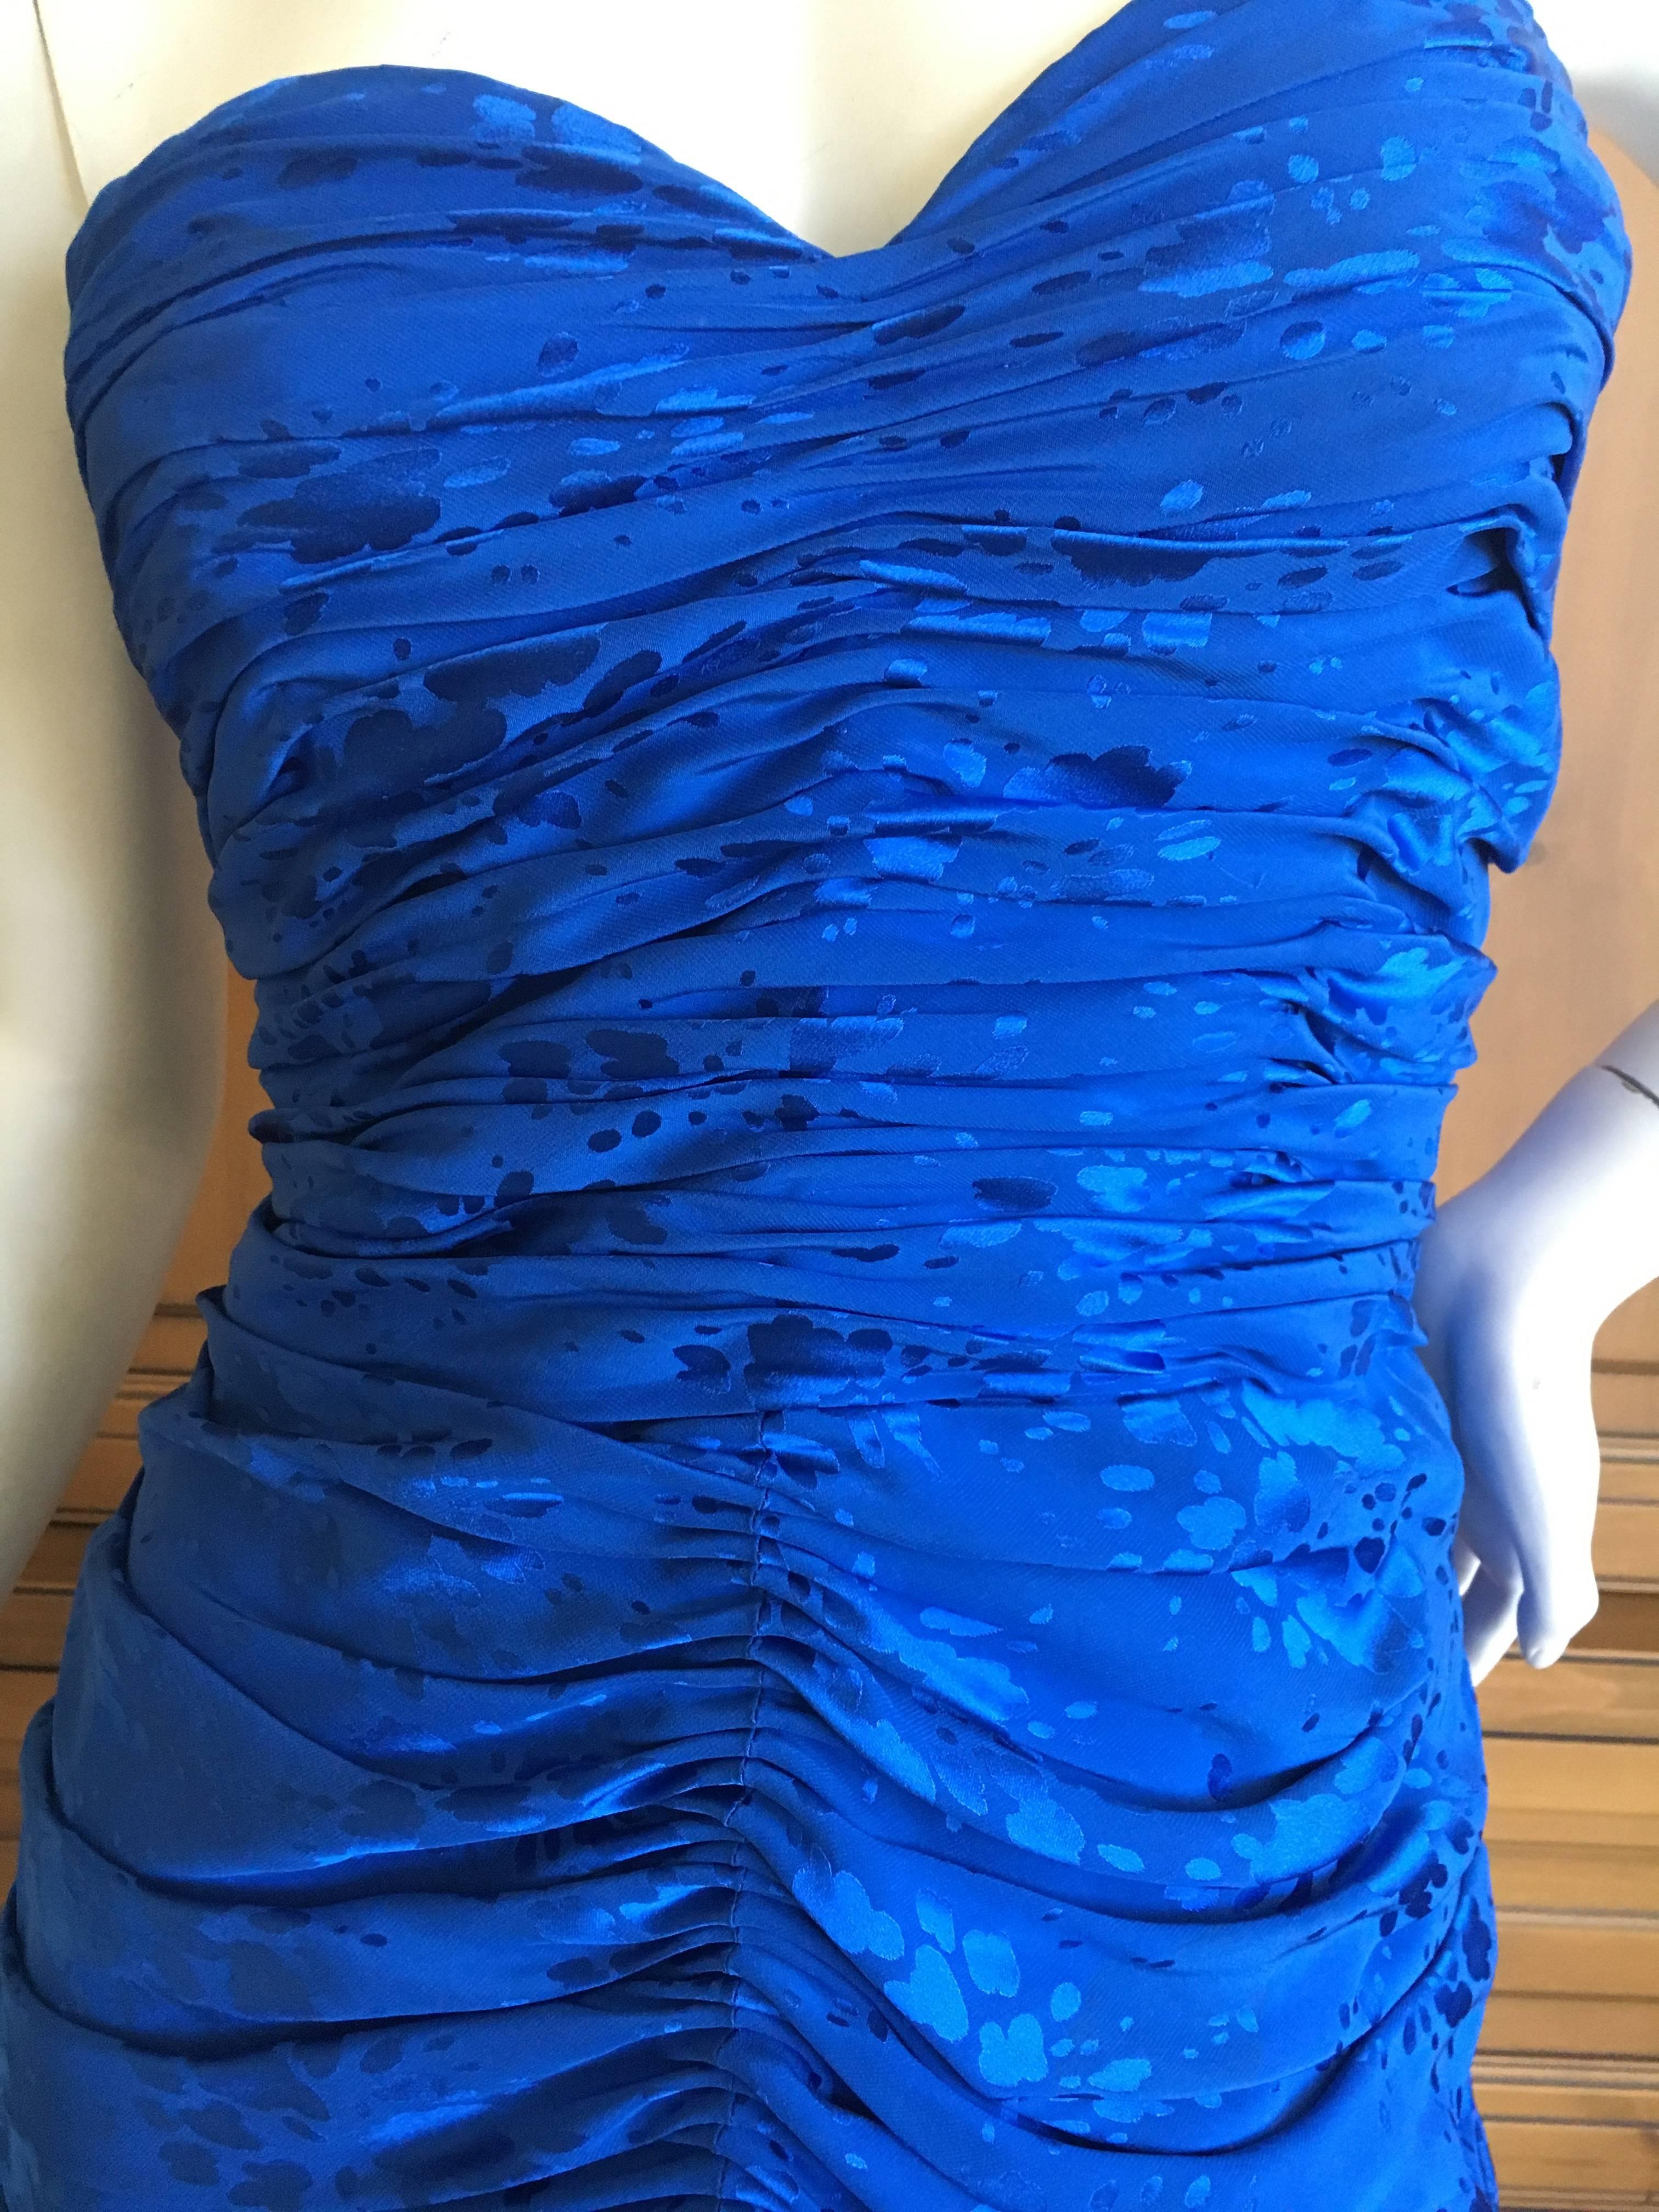 Loris Azzara Couture 1970's Ruched Blue Silk Evening Dress.
This is such a pretty piece. There are ruffle embellished straps , attached by a slim cord, which could easily be removed to wear it strapless.
Inner corset.
Bust 38"
Waist